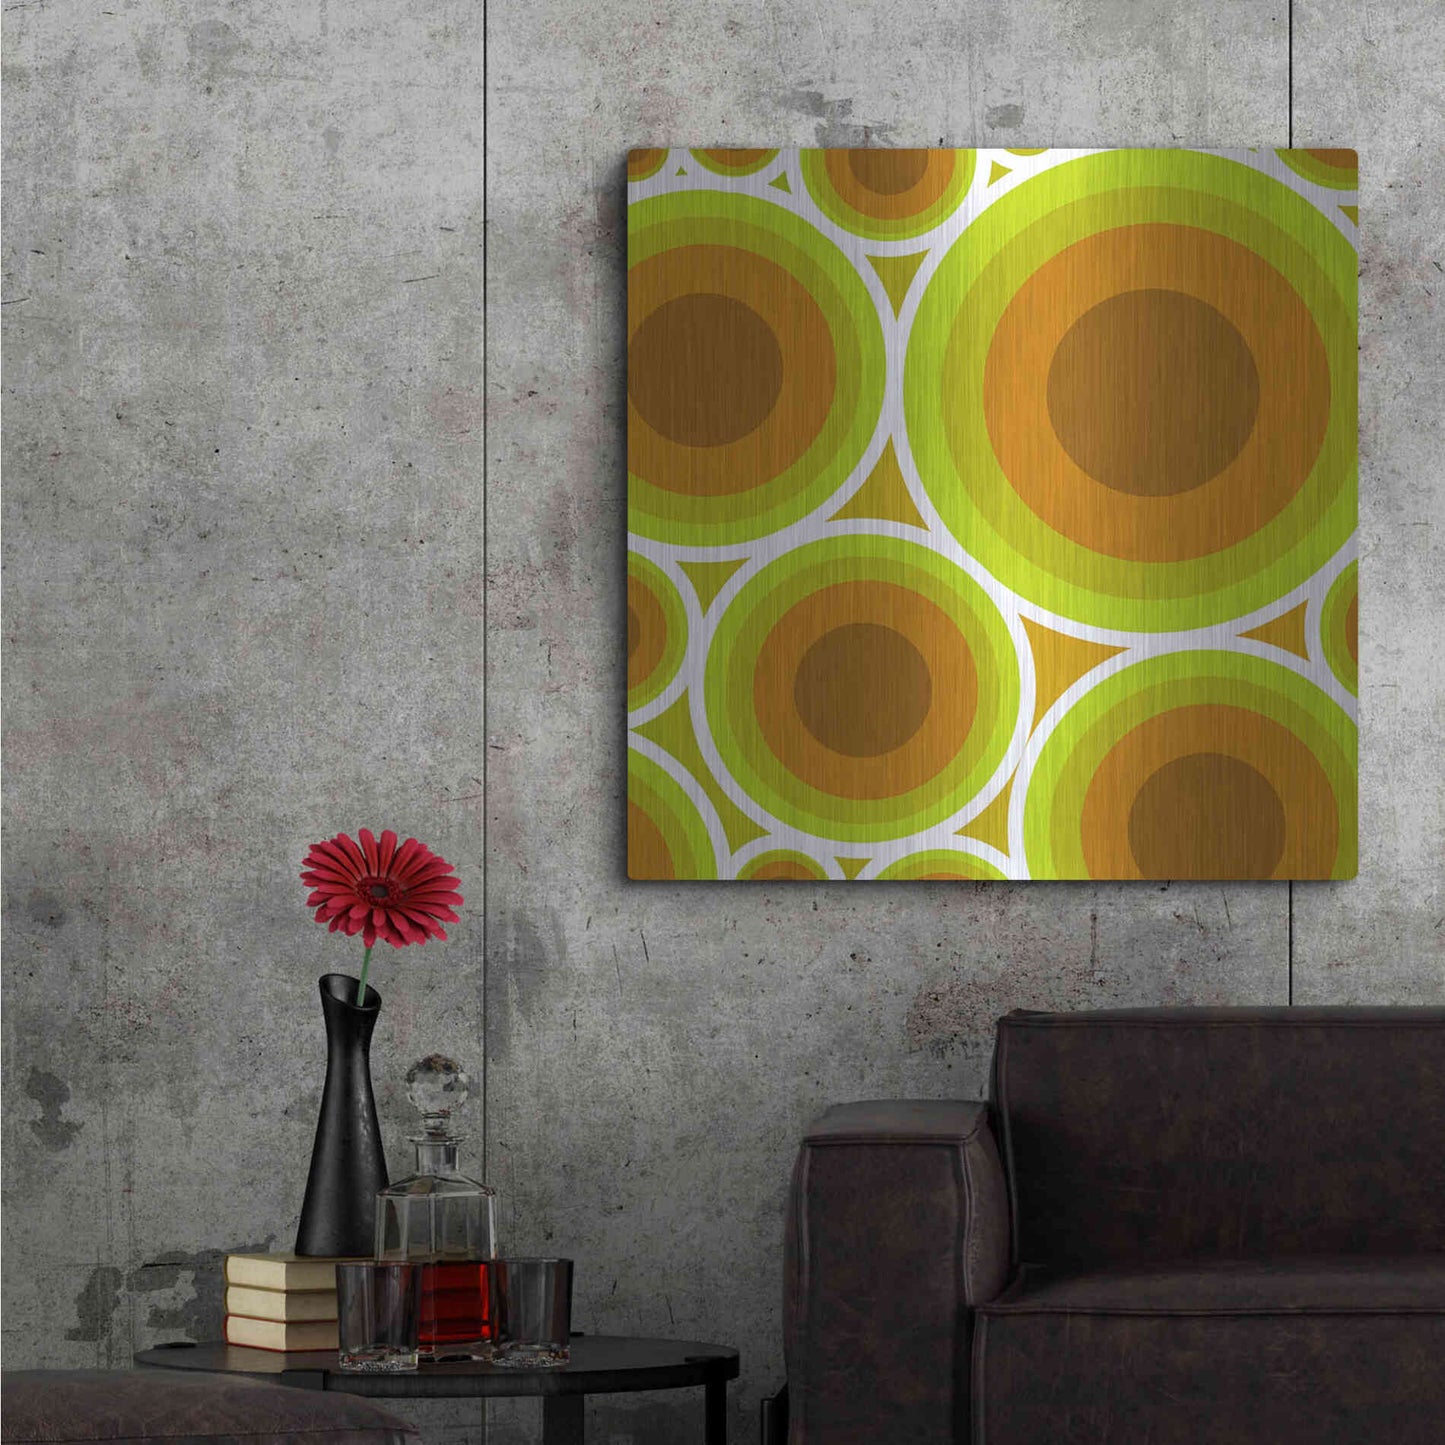 Luxe Metal Art 'Circles 2' by GraphINC, Metal Wall Art,36x36